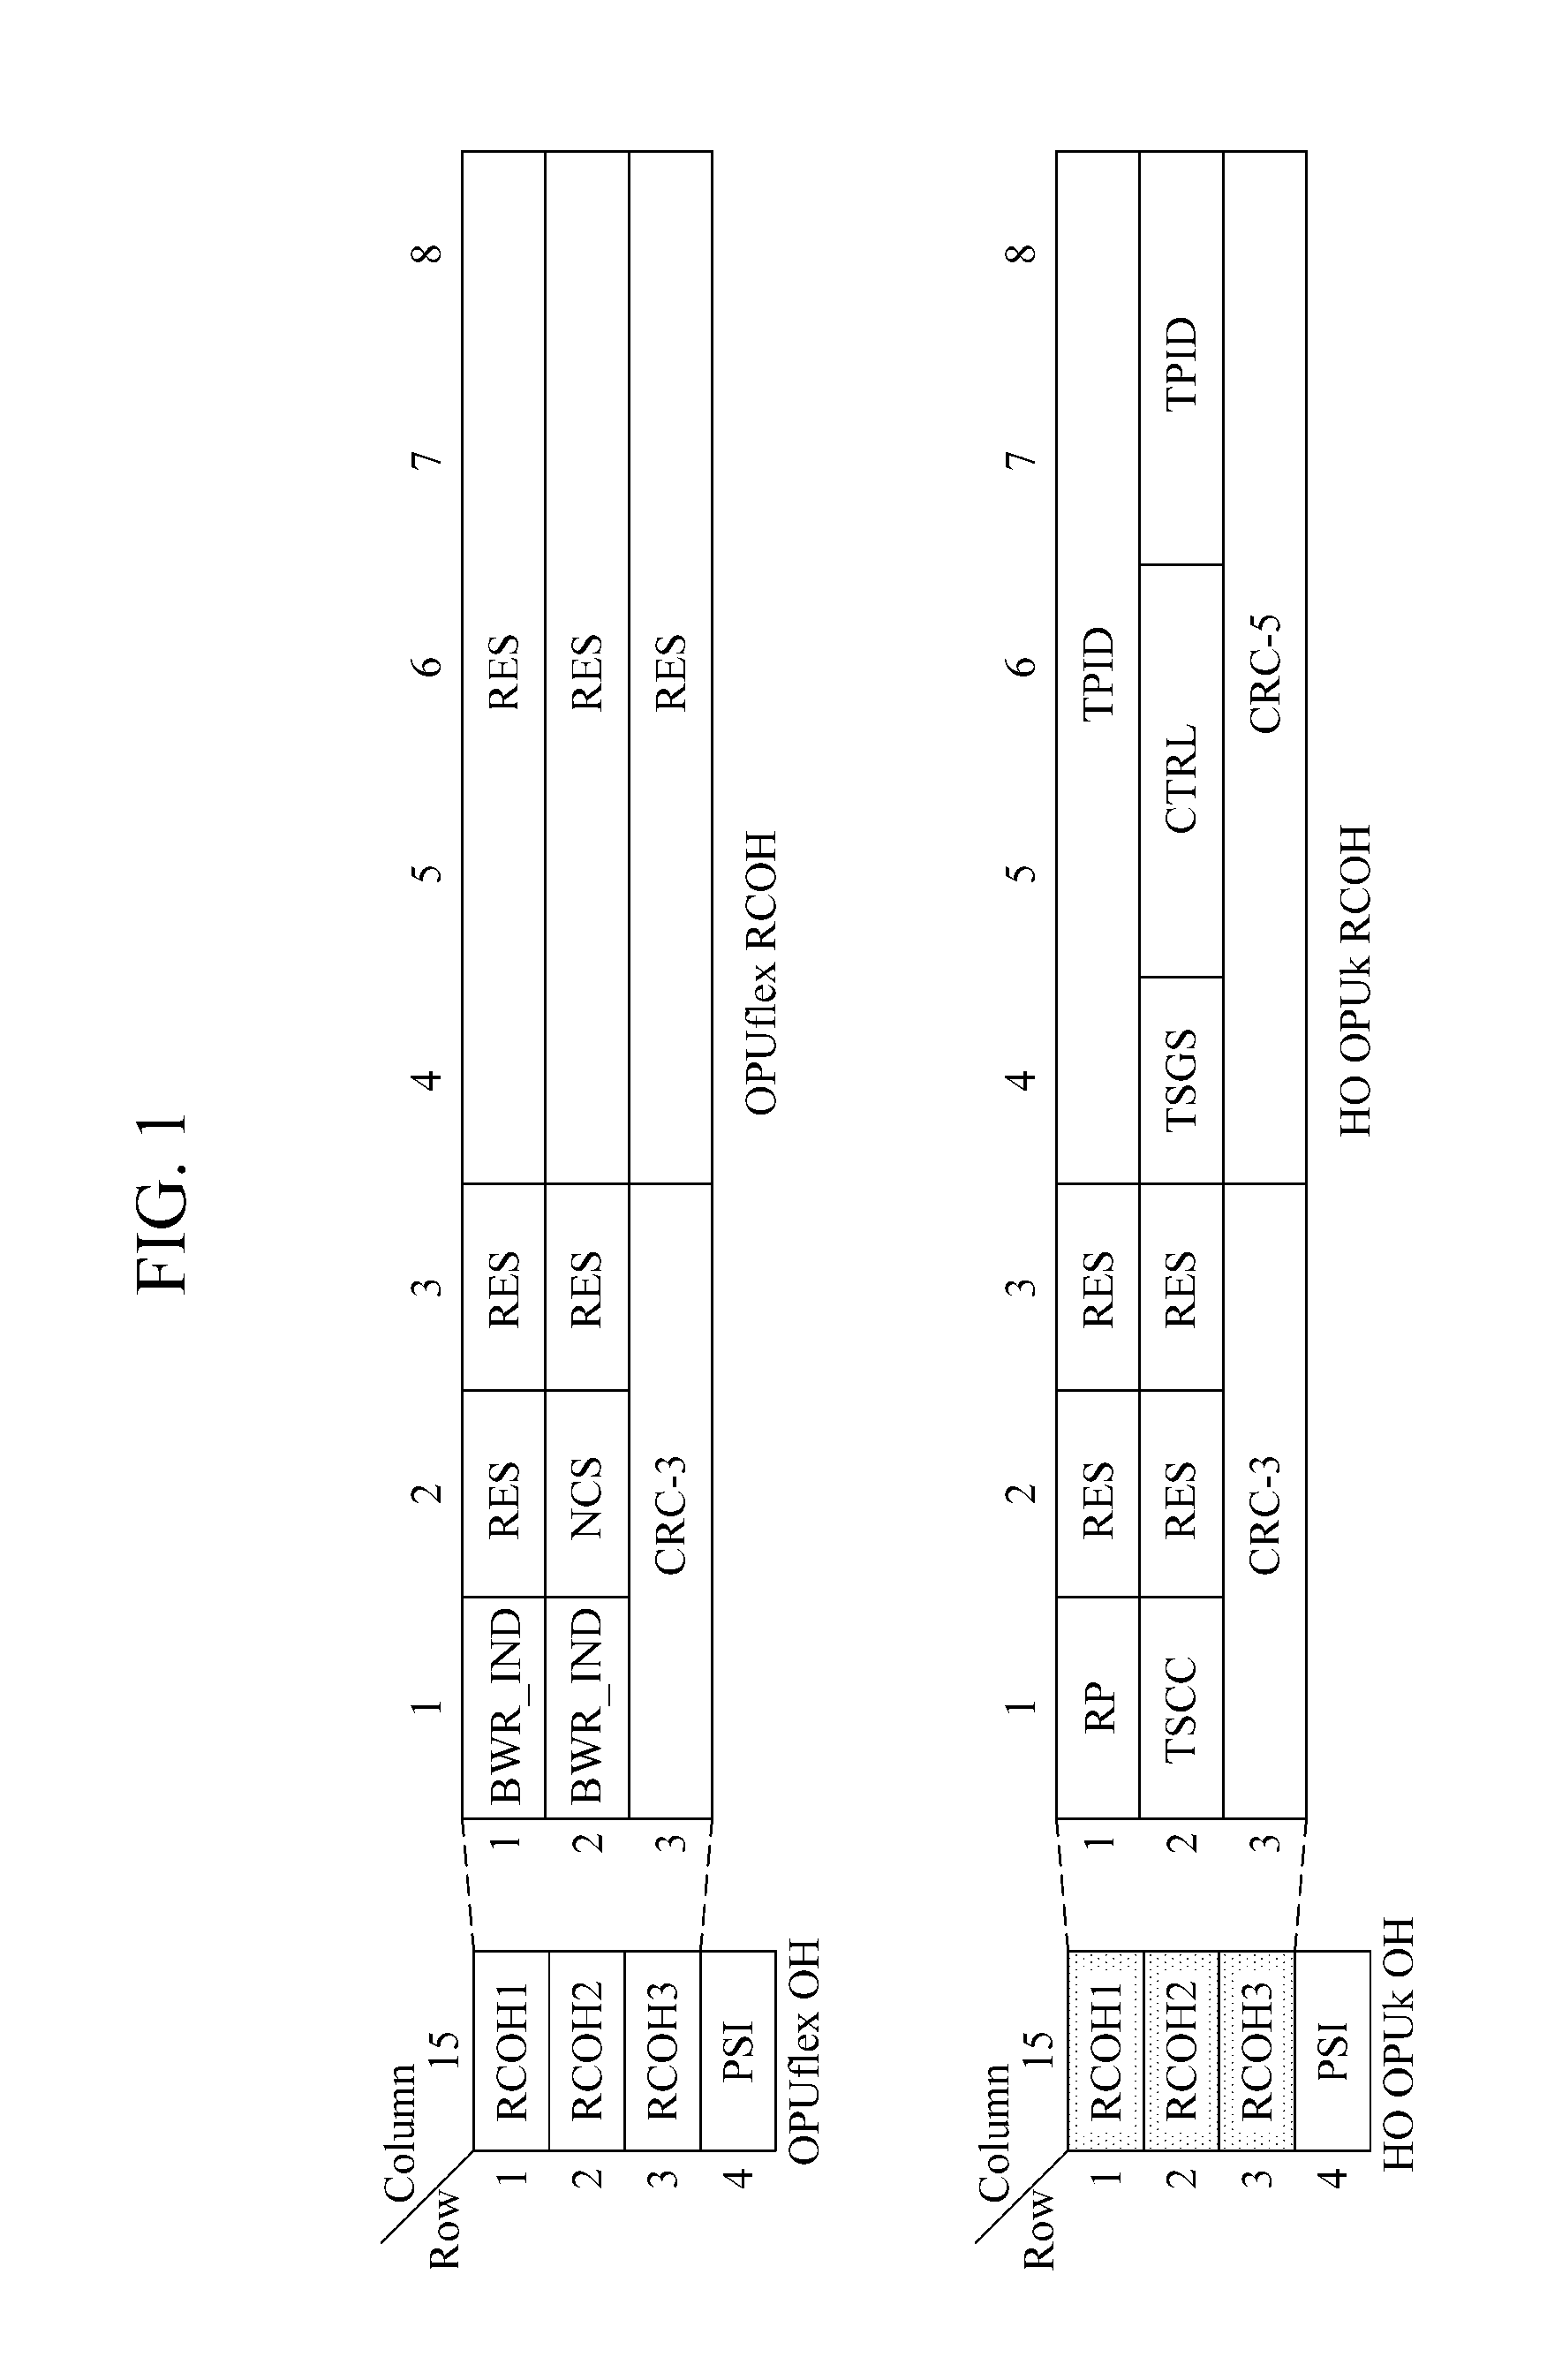 Method for resizing network connection in the optical transport network supporting protection switching